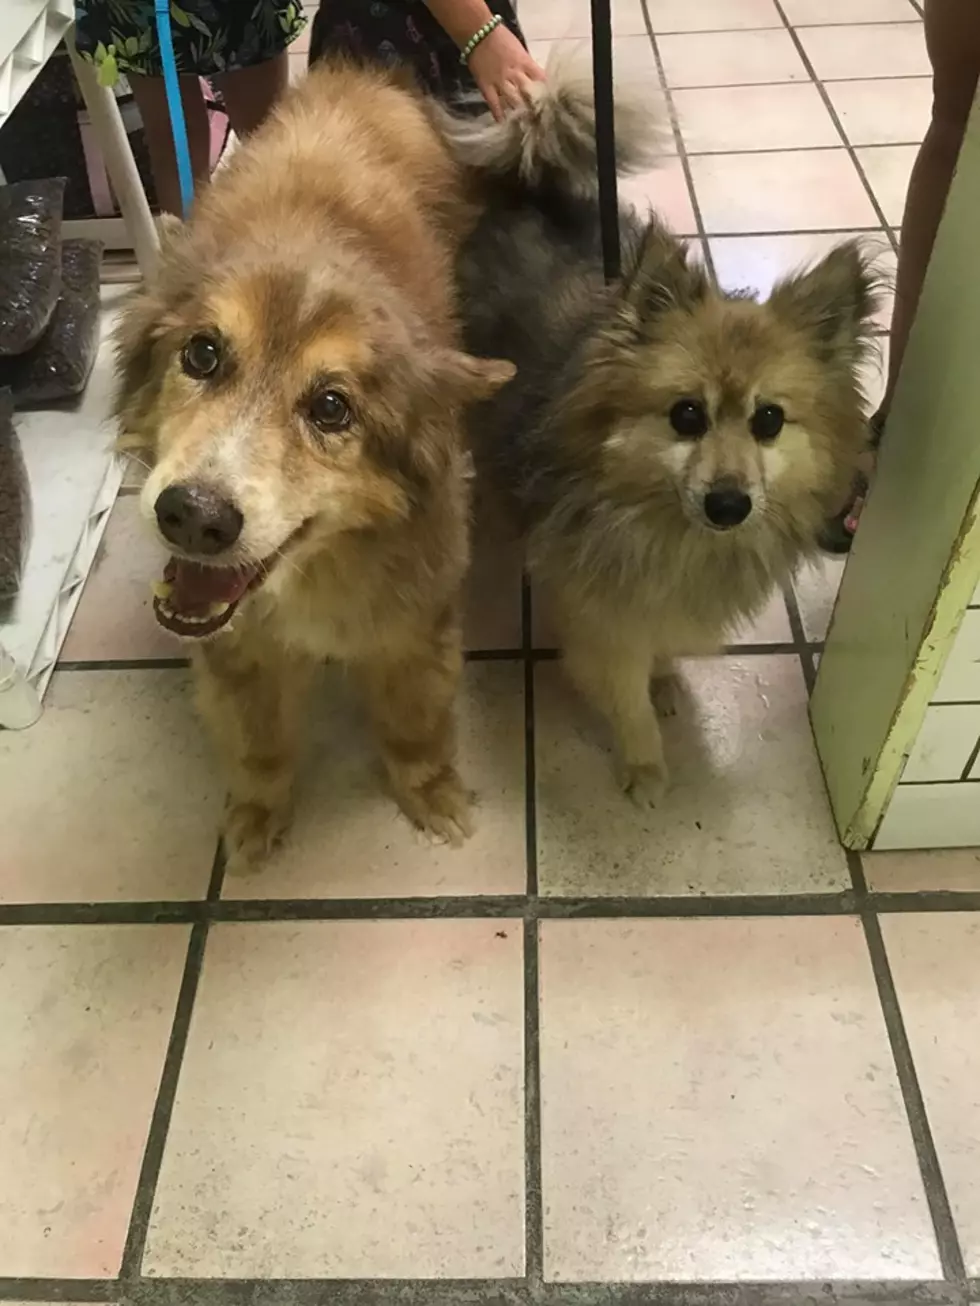 WHS Shares Happy ‘Tail’ of Two Senior Dogs Reuniting